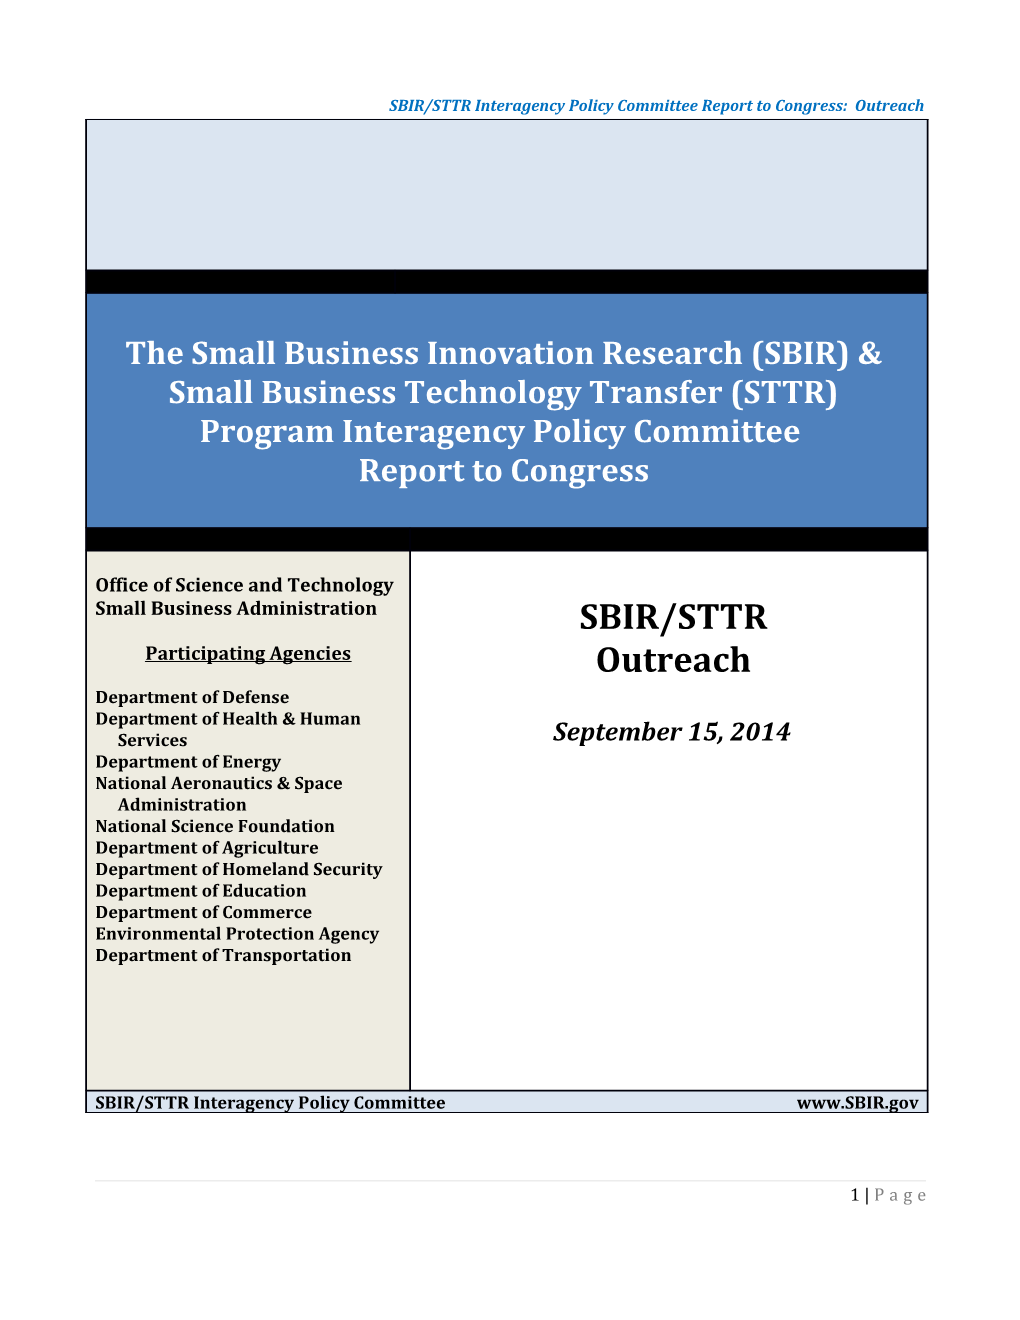 SBIR/STTR Interagency Policy Committee Report to Congress: Outreach